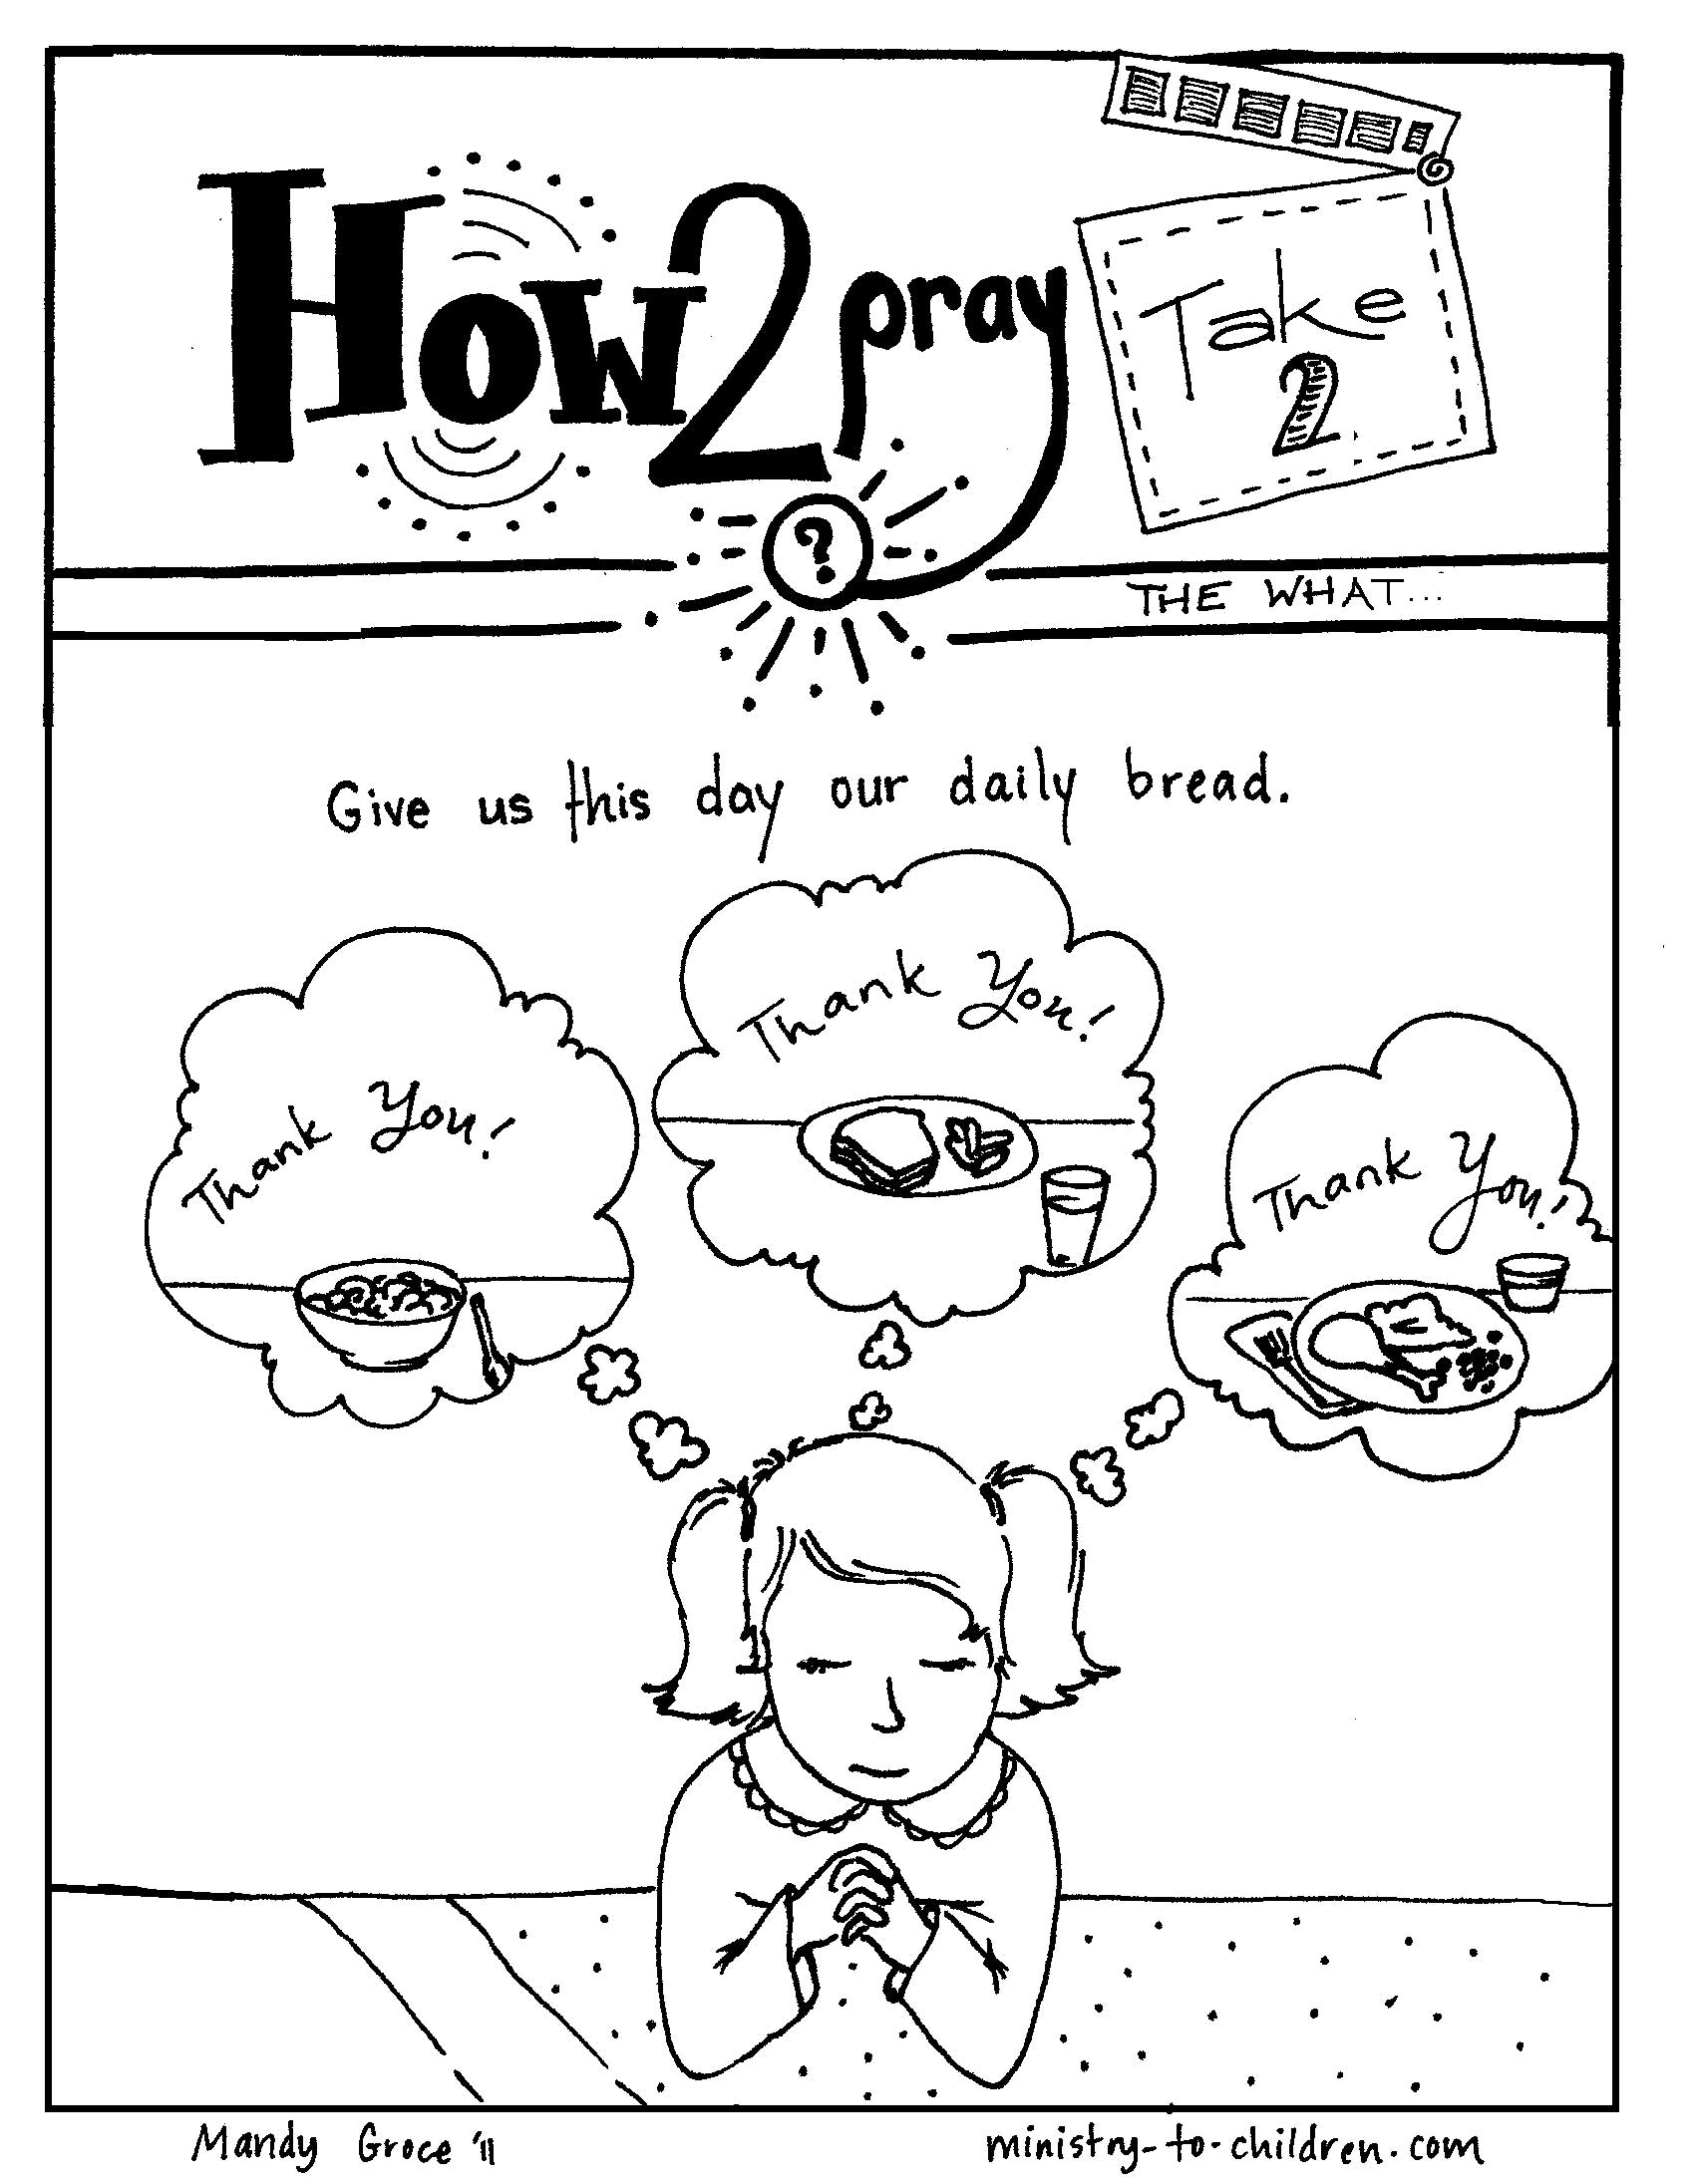 Prayer Sunday School Coloring Pages Image